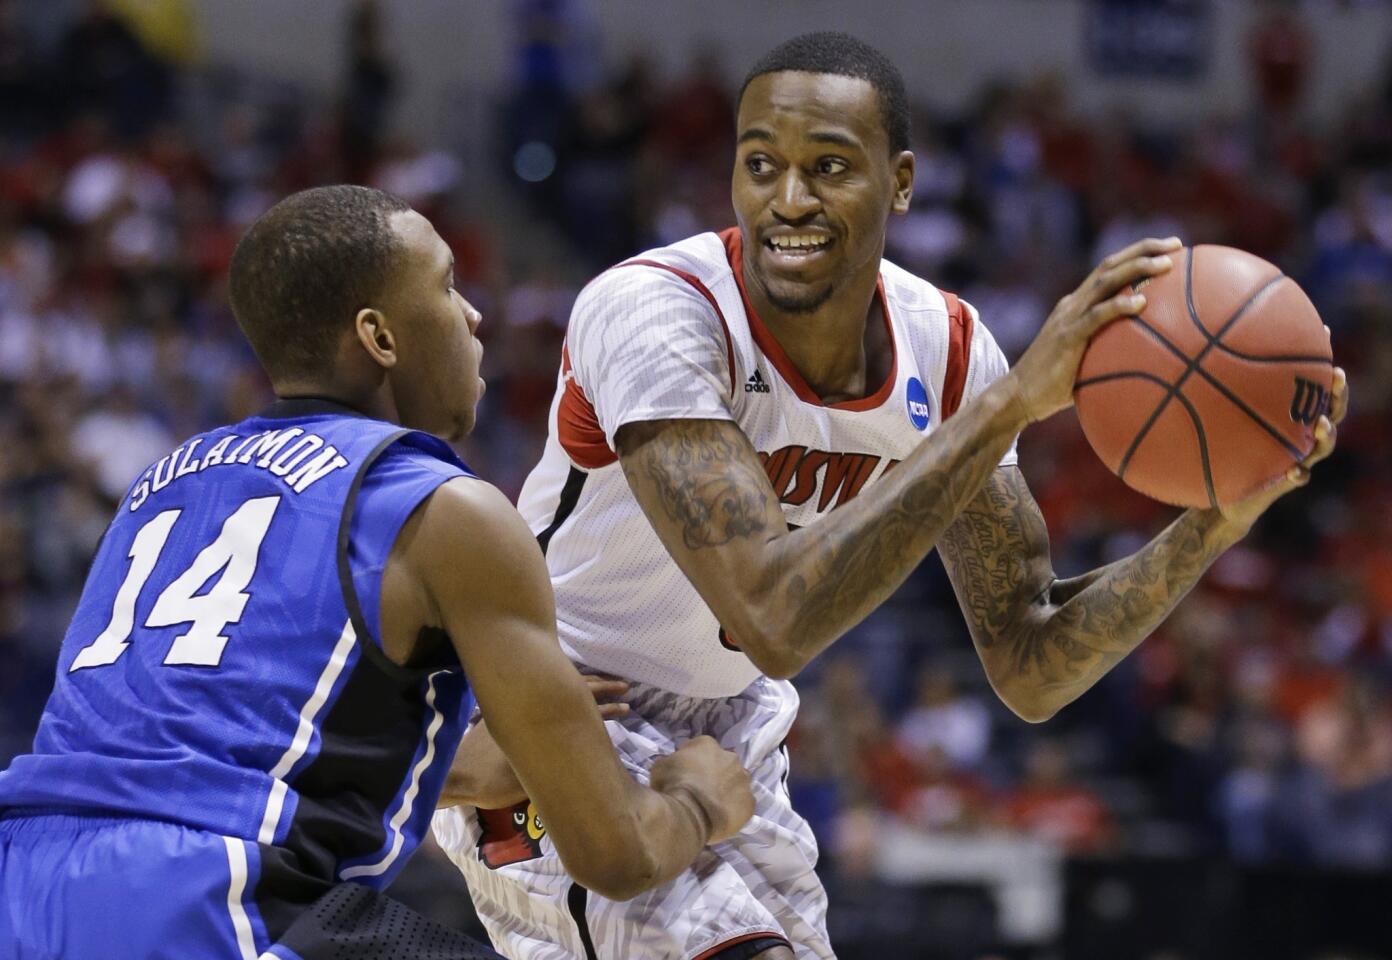 Louisville guard Kevin Ware looks to pass against the defense of Duke guard Rasheed Sulaimon in the first half of the NCAA tournament Midwest Regional final on Sunday at Lucas Oil Stadium in Indianapolis.